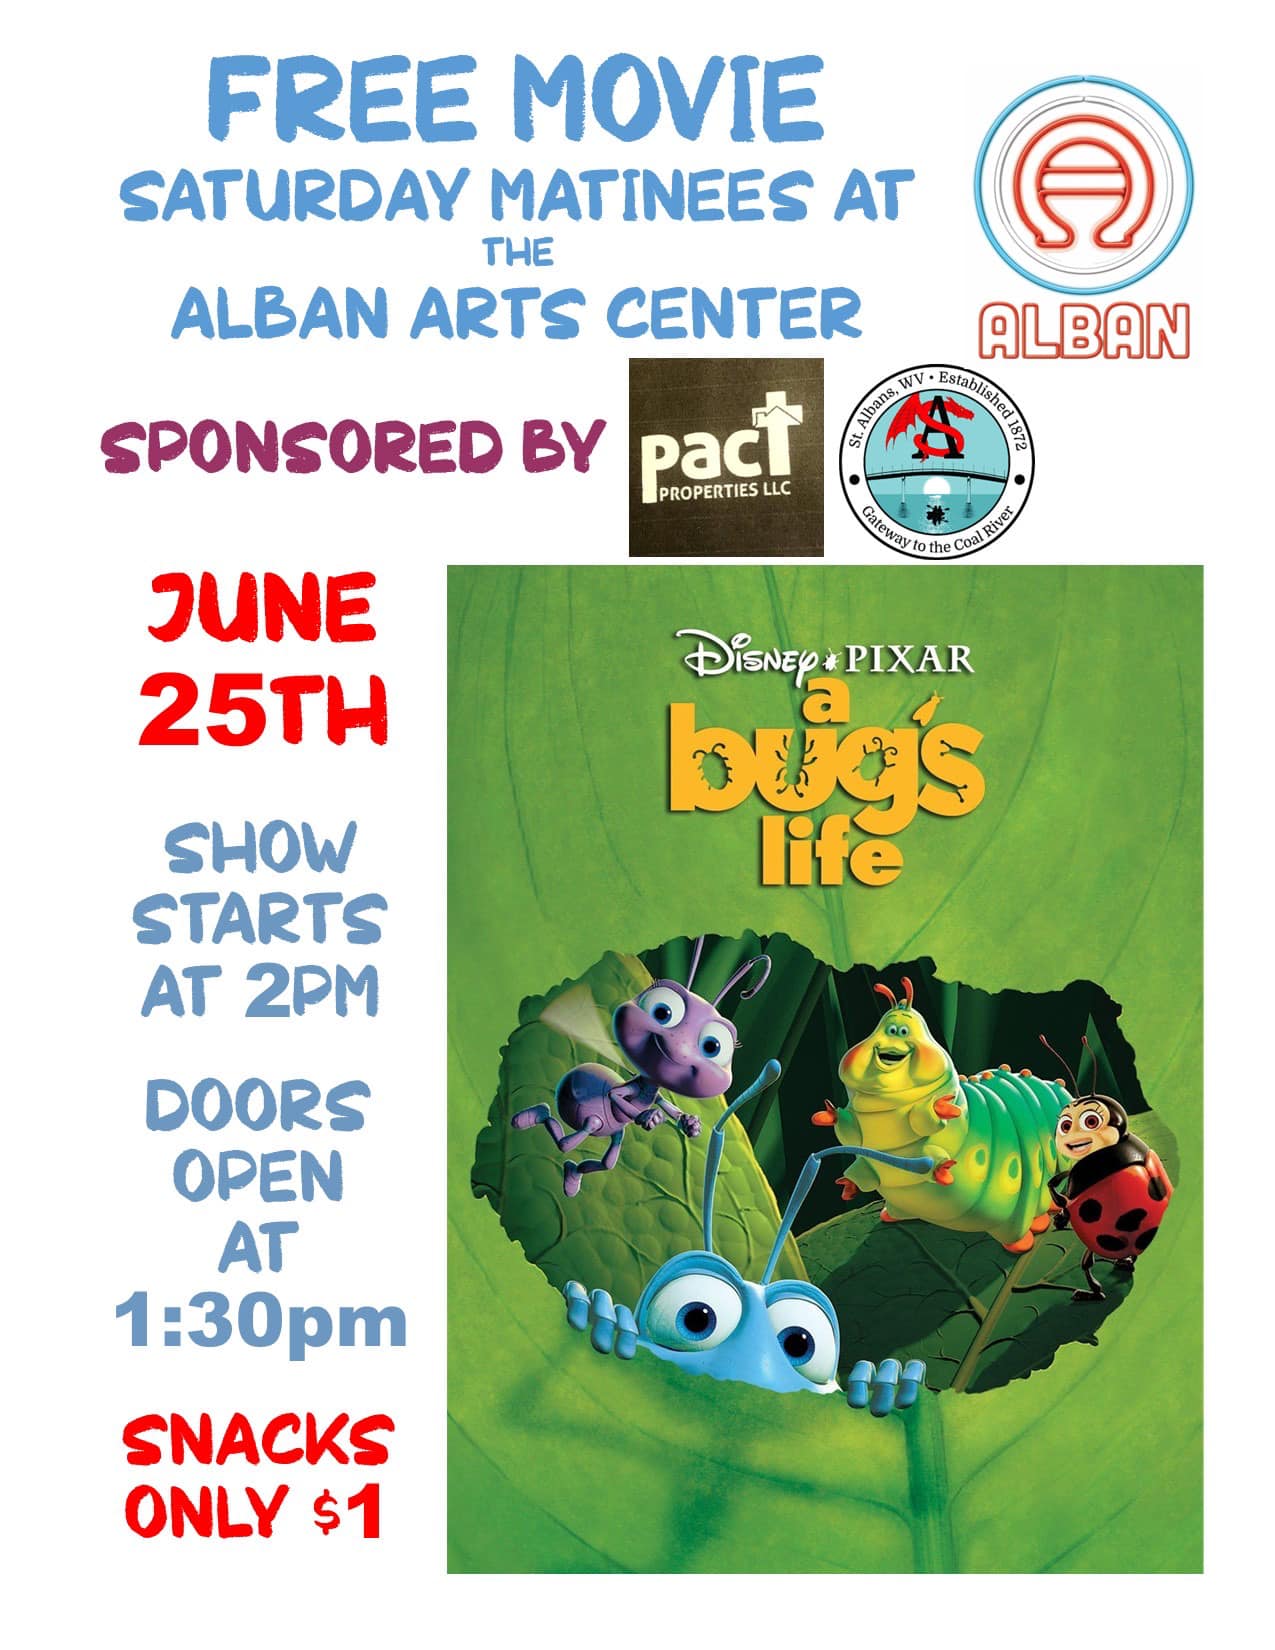 A Bug's Life - Free Movie at the Alban Arts Center